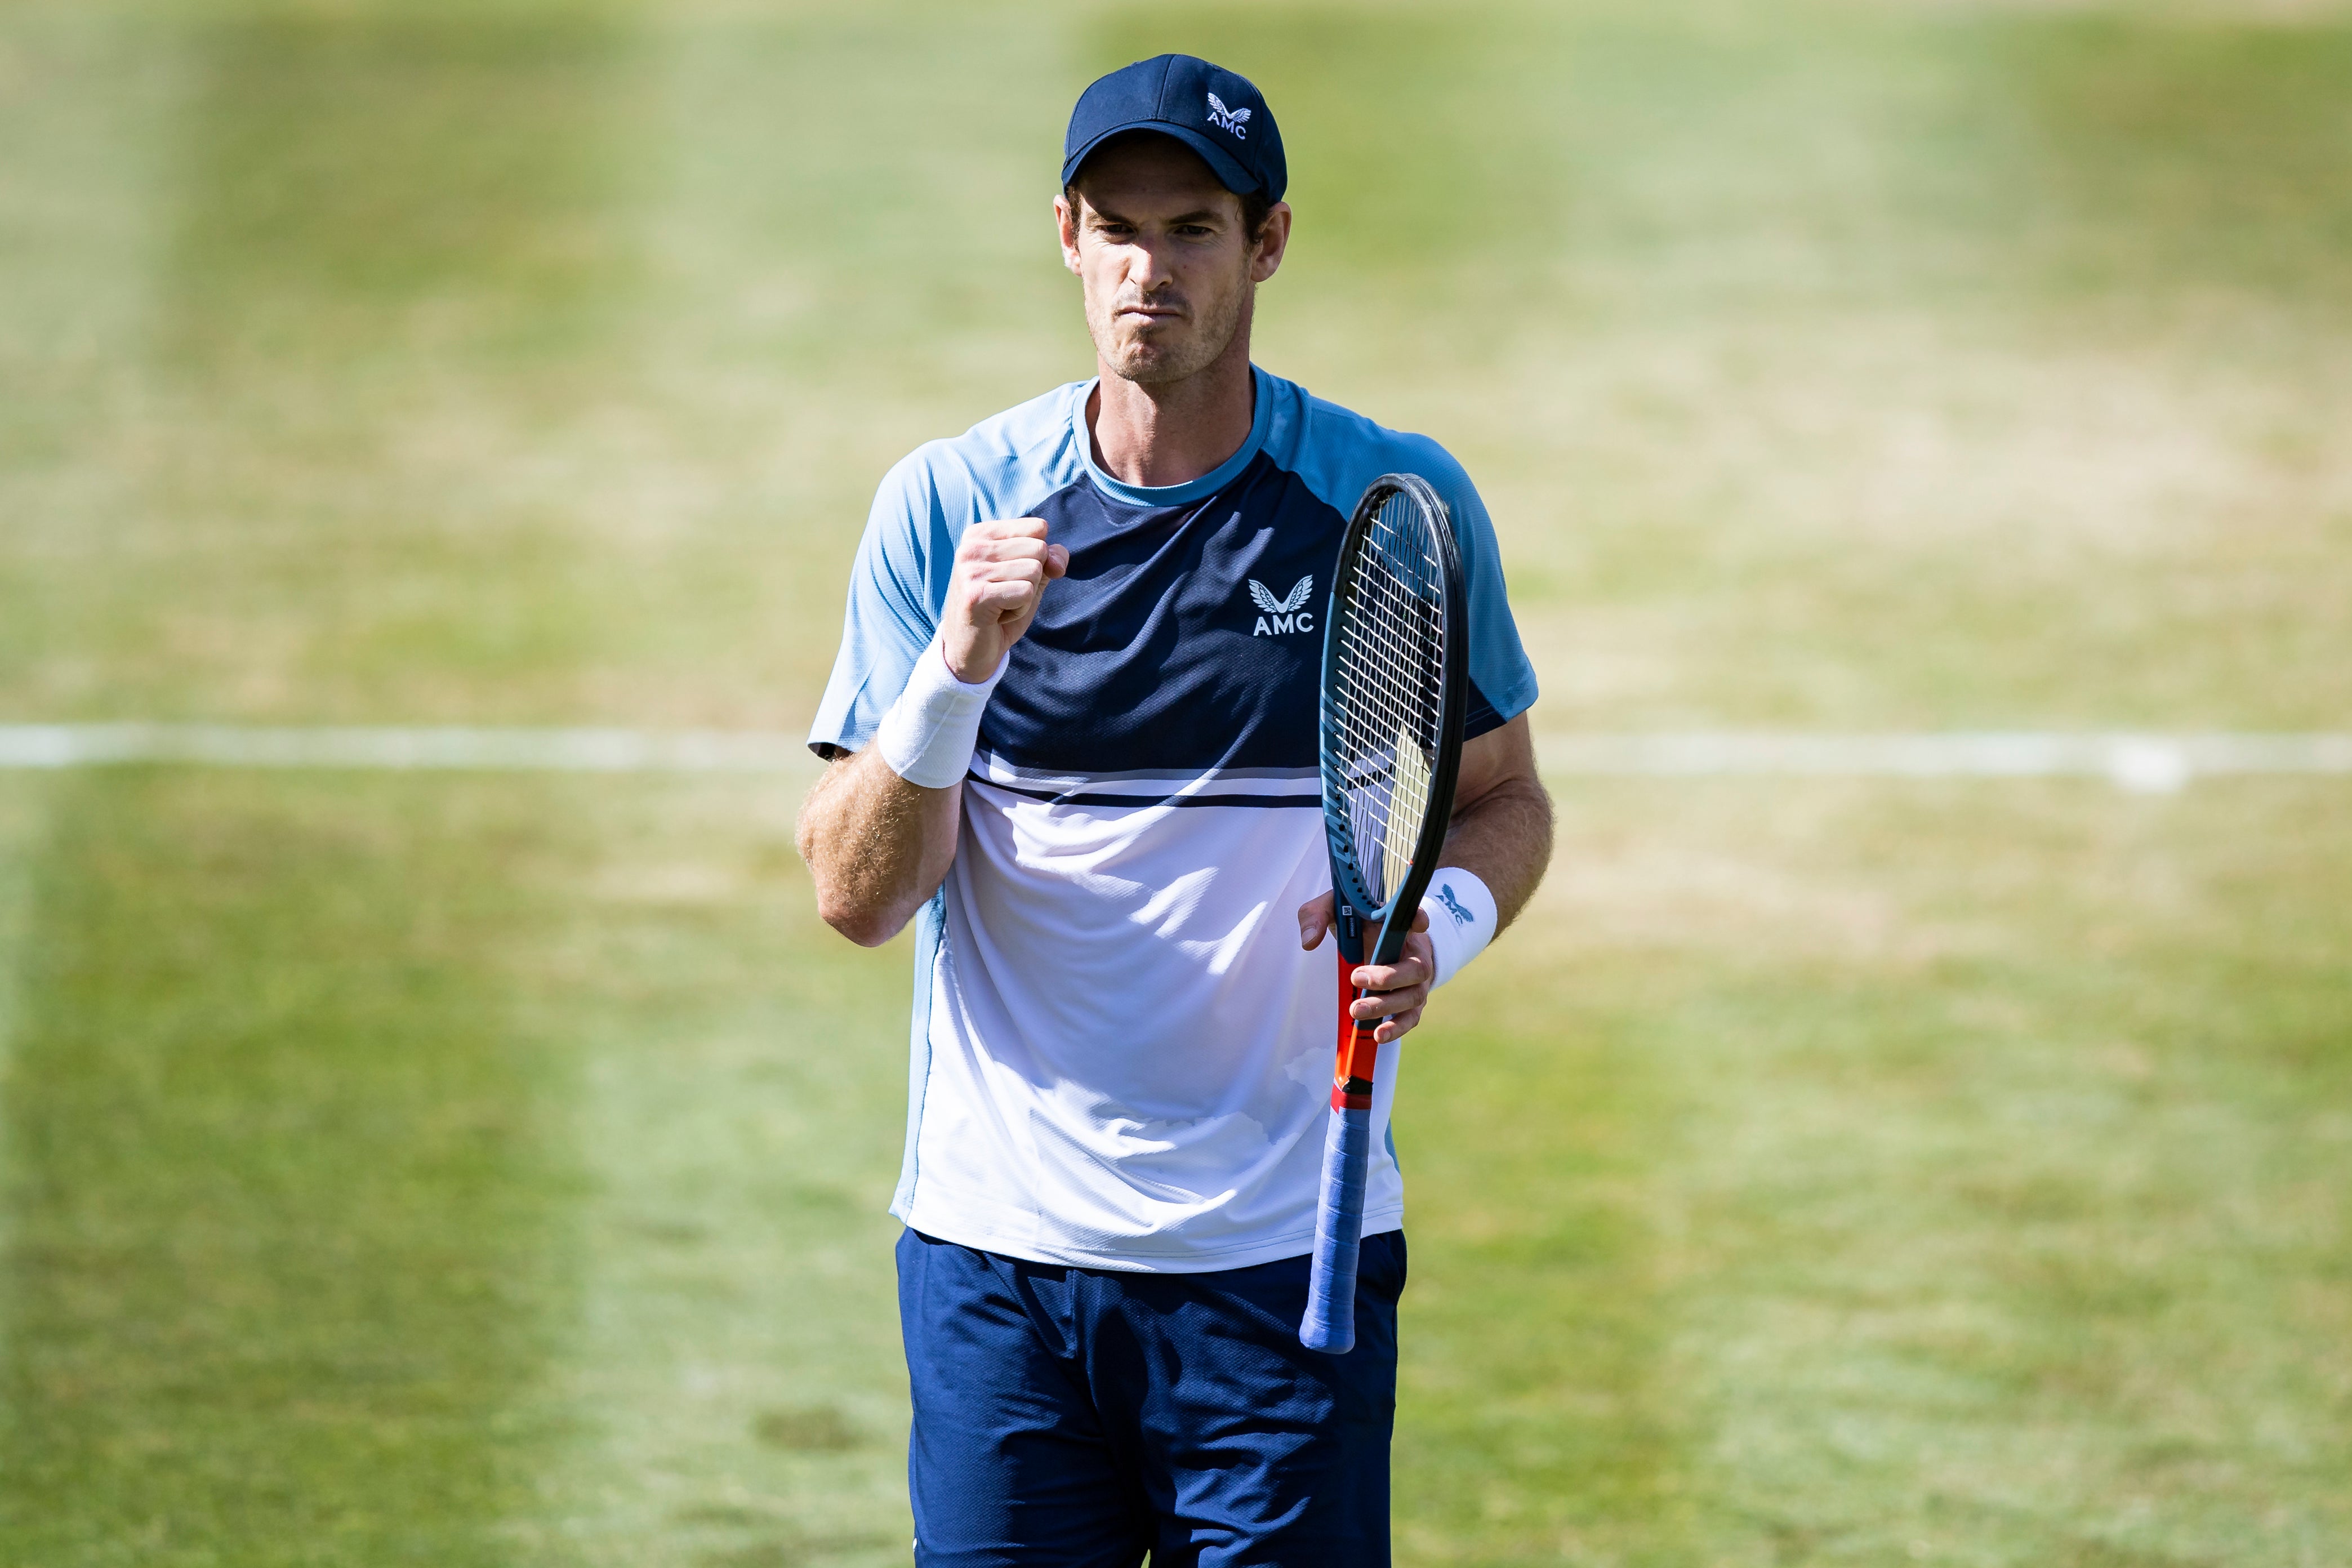 Andy Murray celebrates after winning a point against Stefanos Tsitsipas